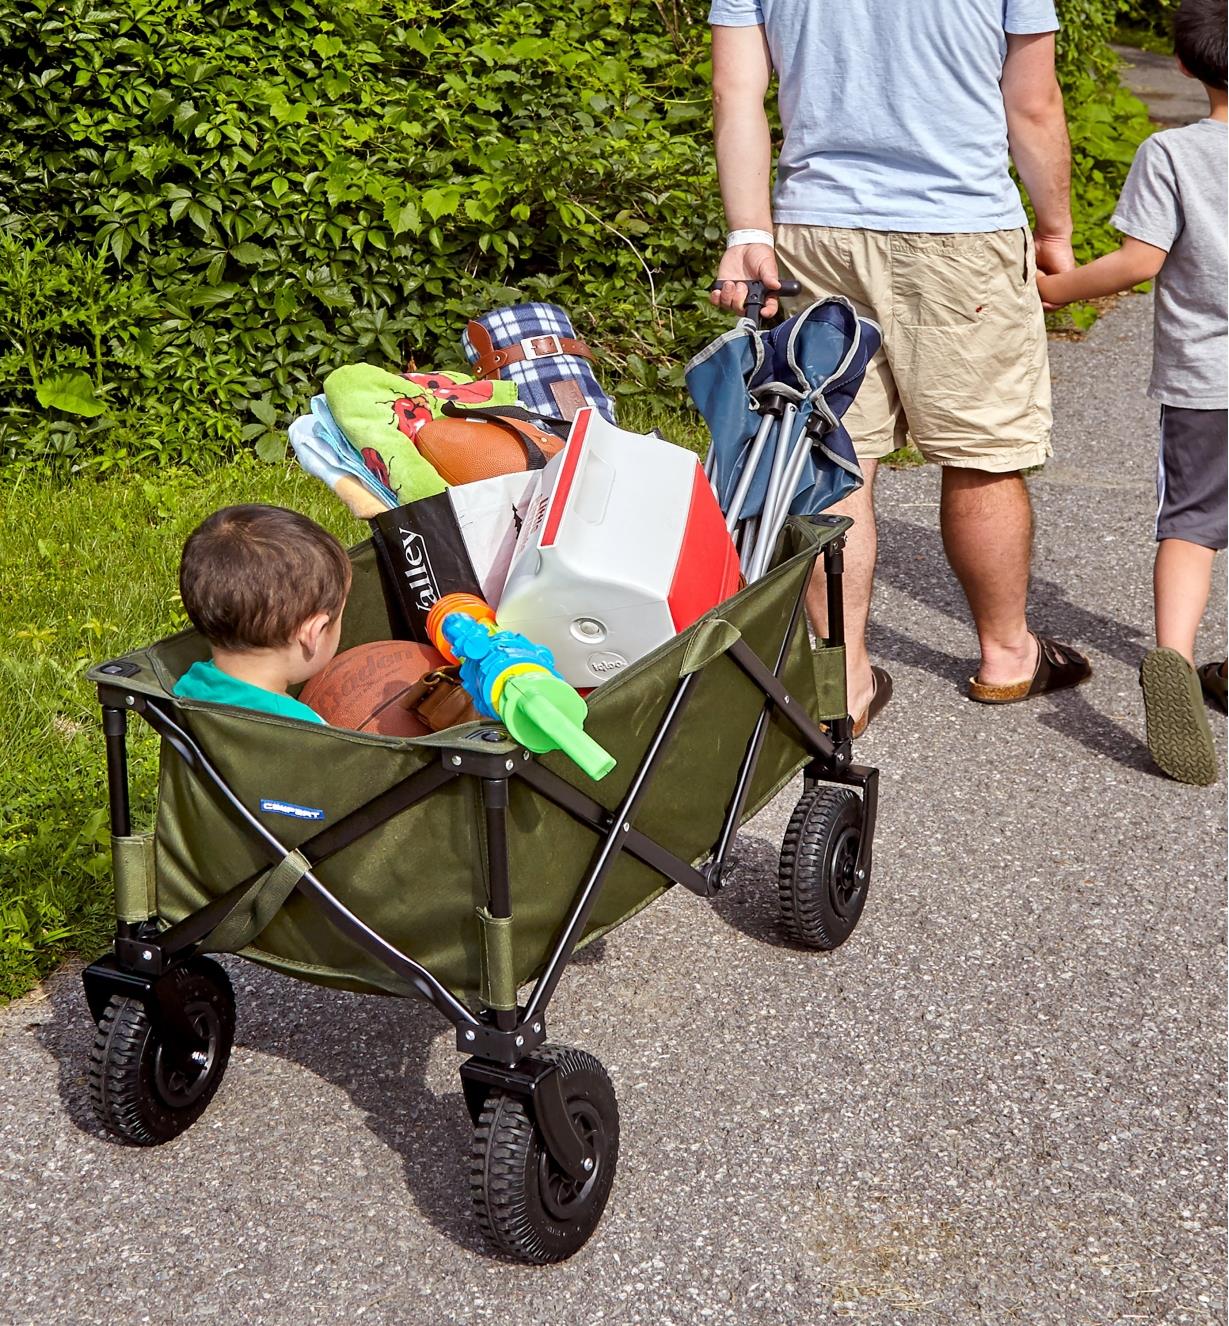 A father pulls a boy in a folding cart, along with a cooler and other supplies for a day in the park